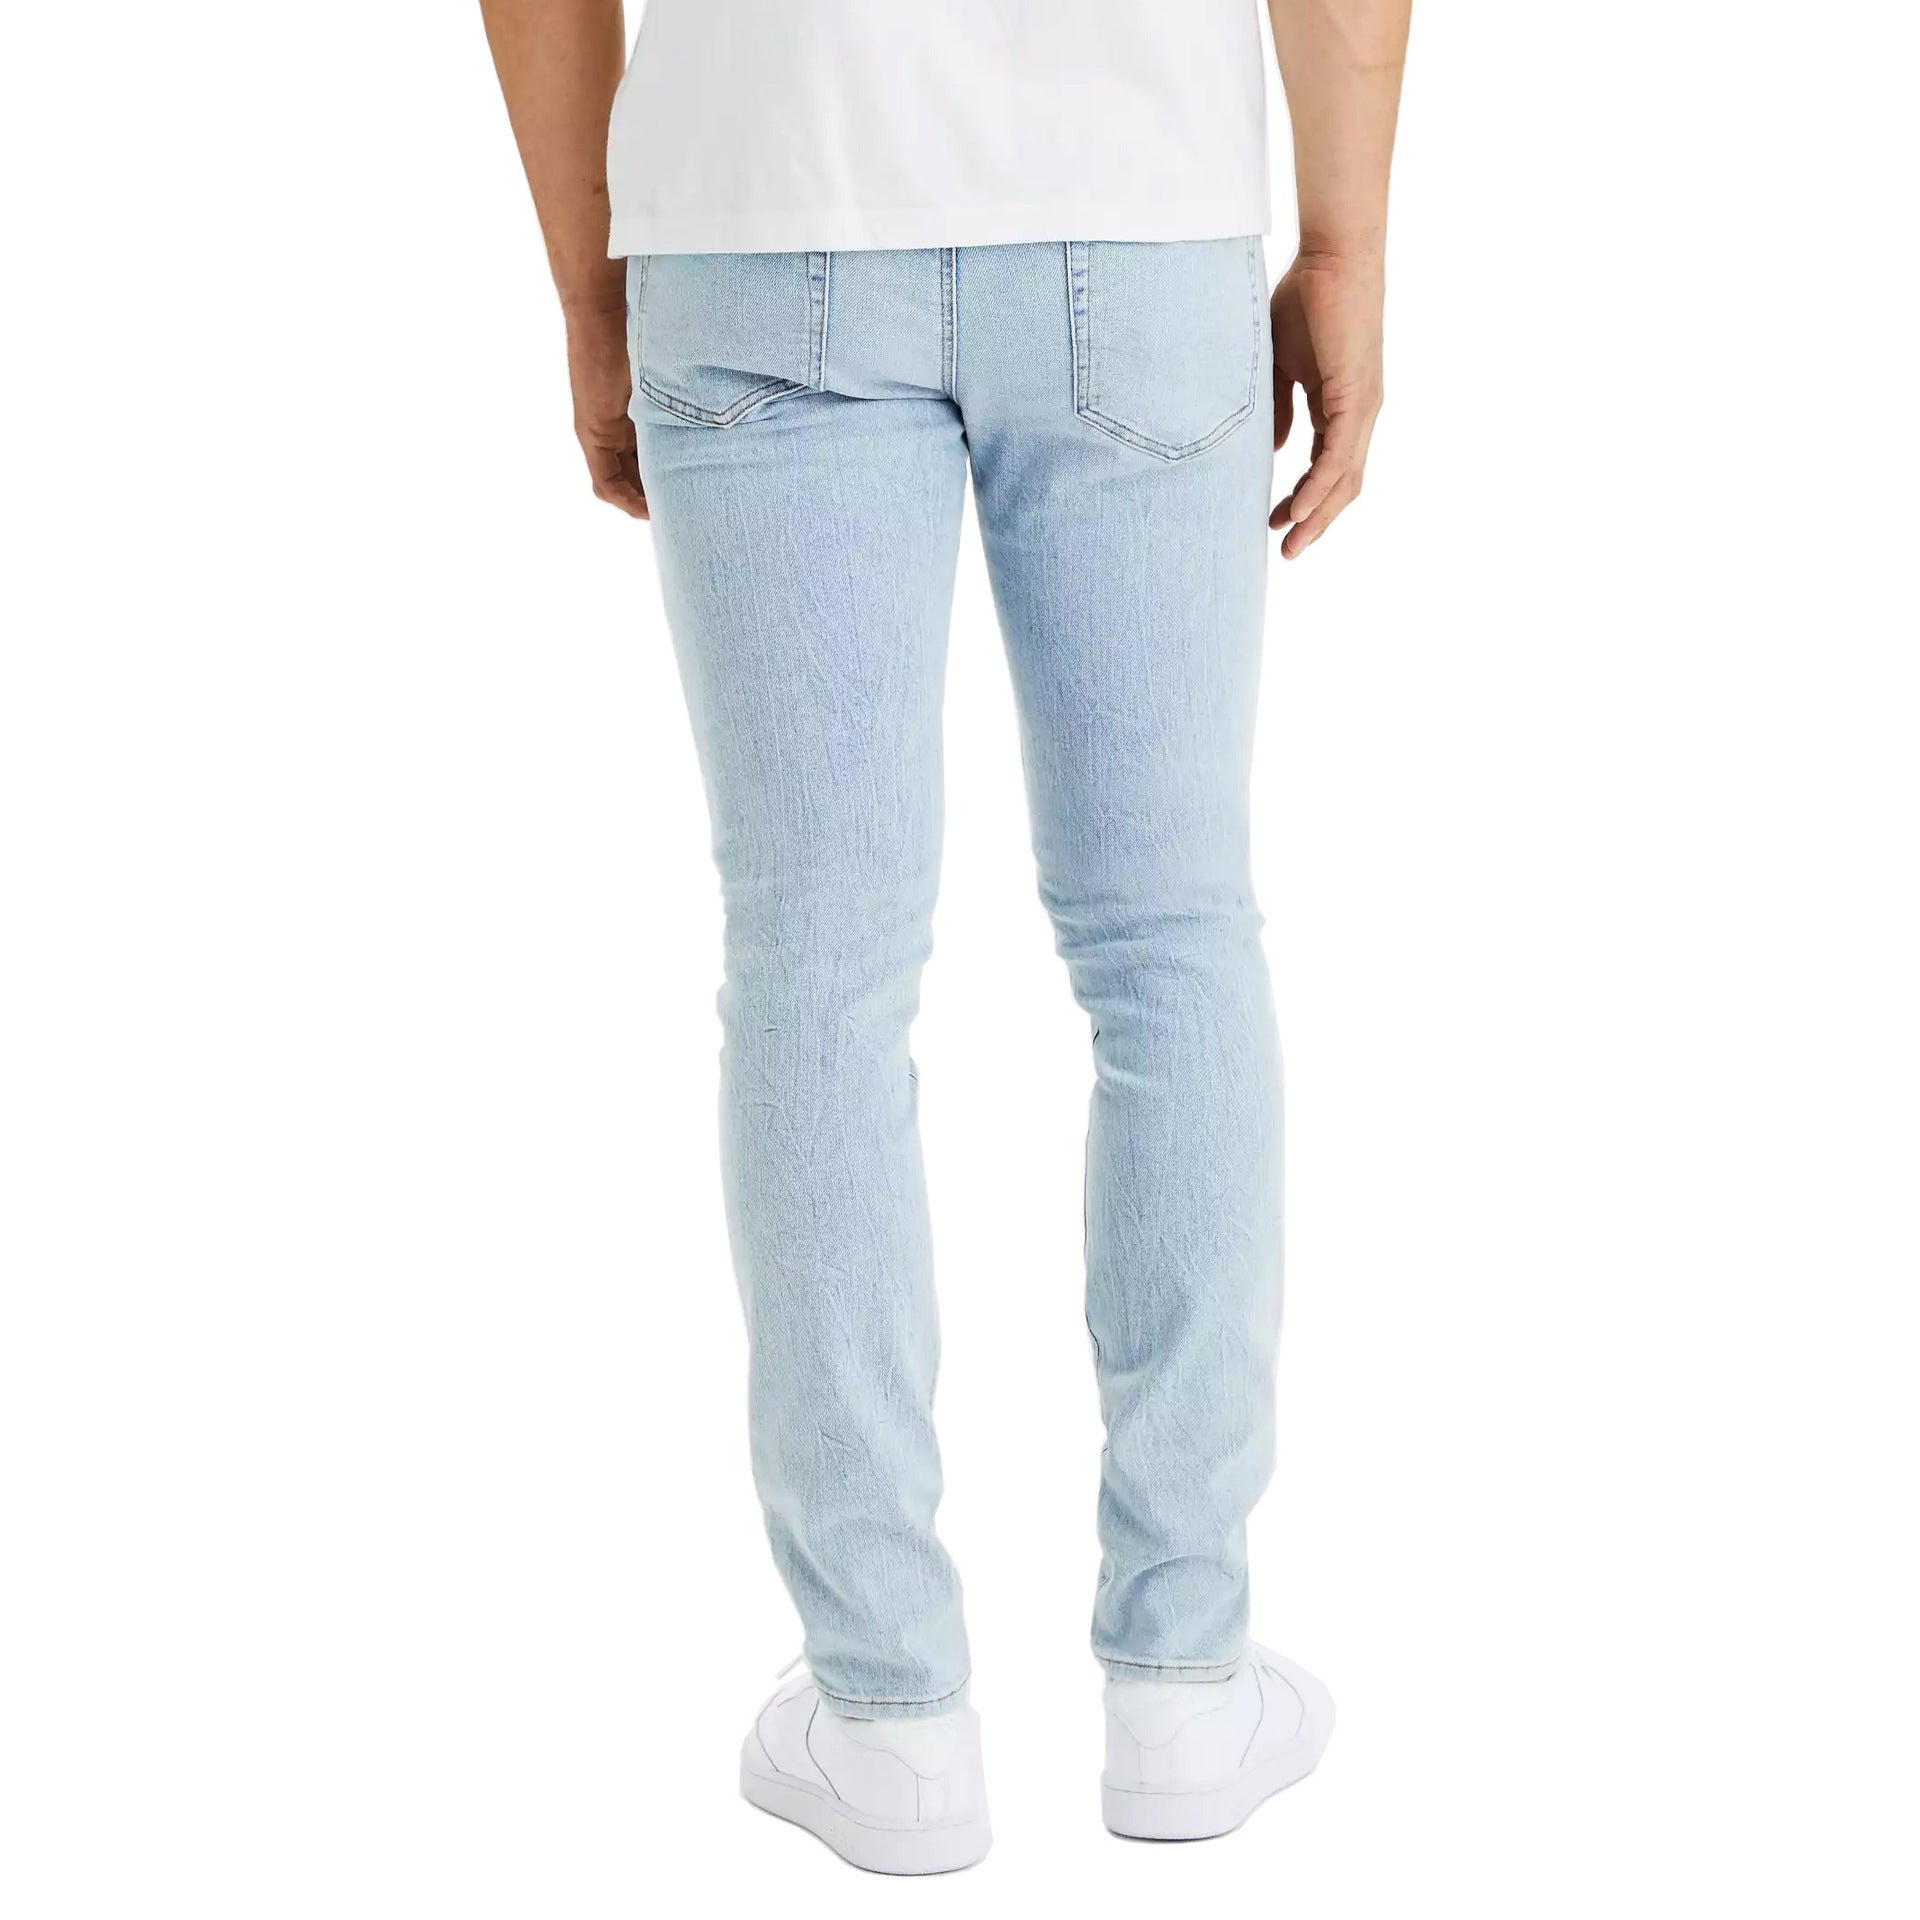 Fashion High-quality Washed Men's Jeans Slim-fit Stretch Men's Jeans